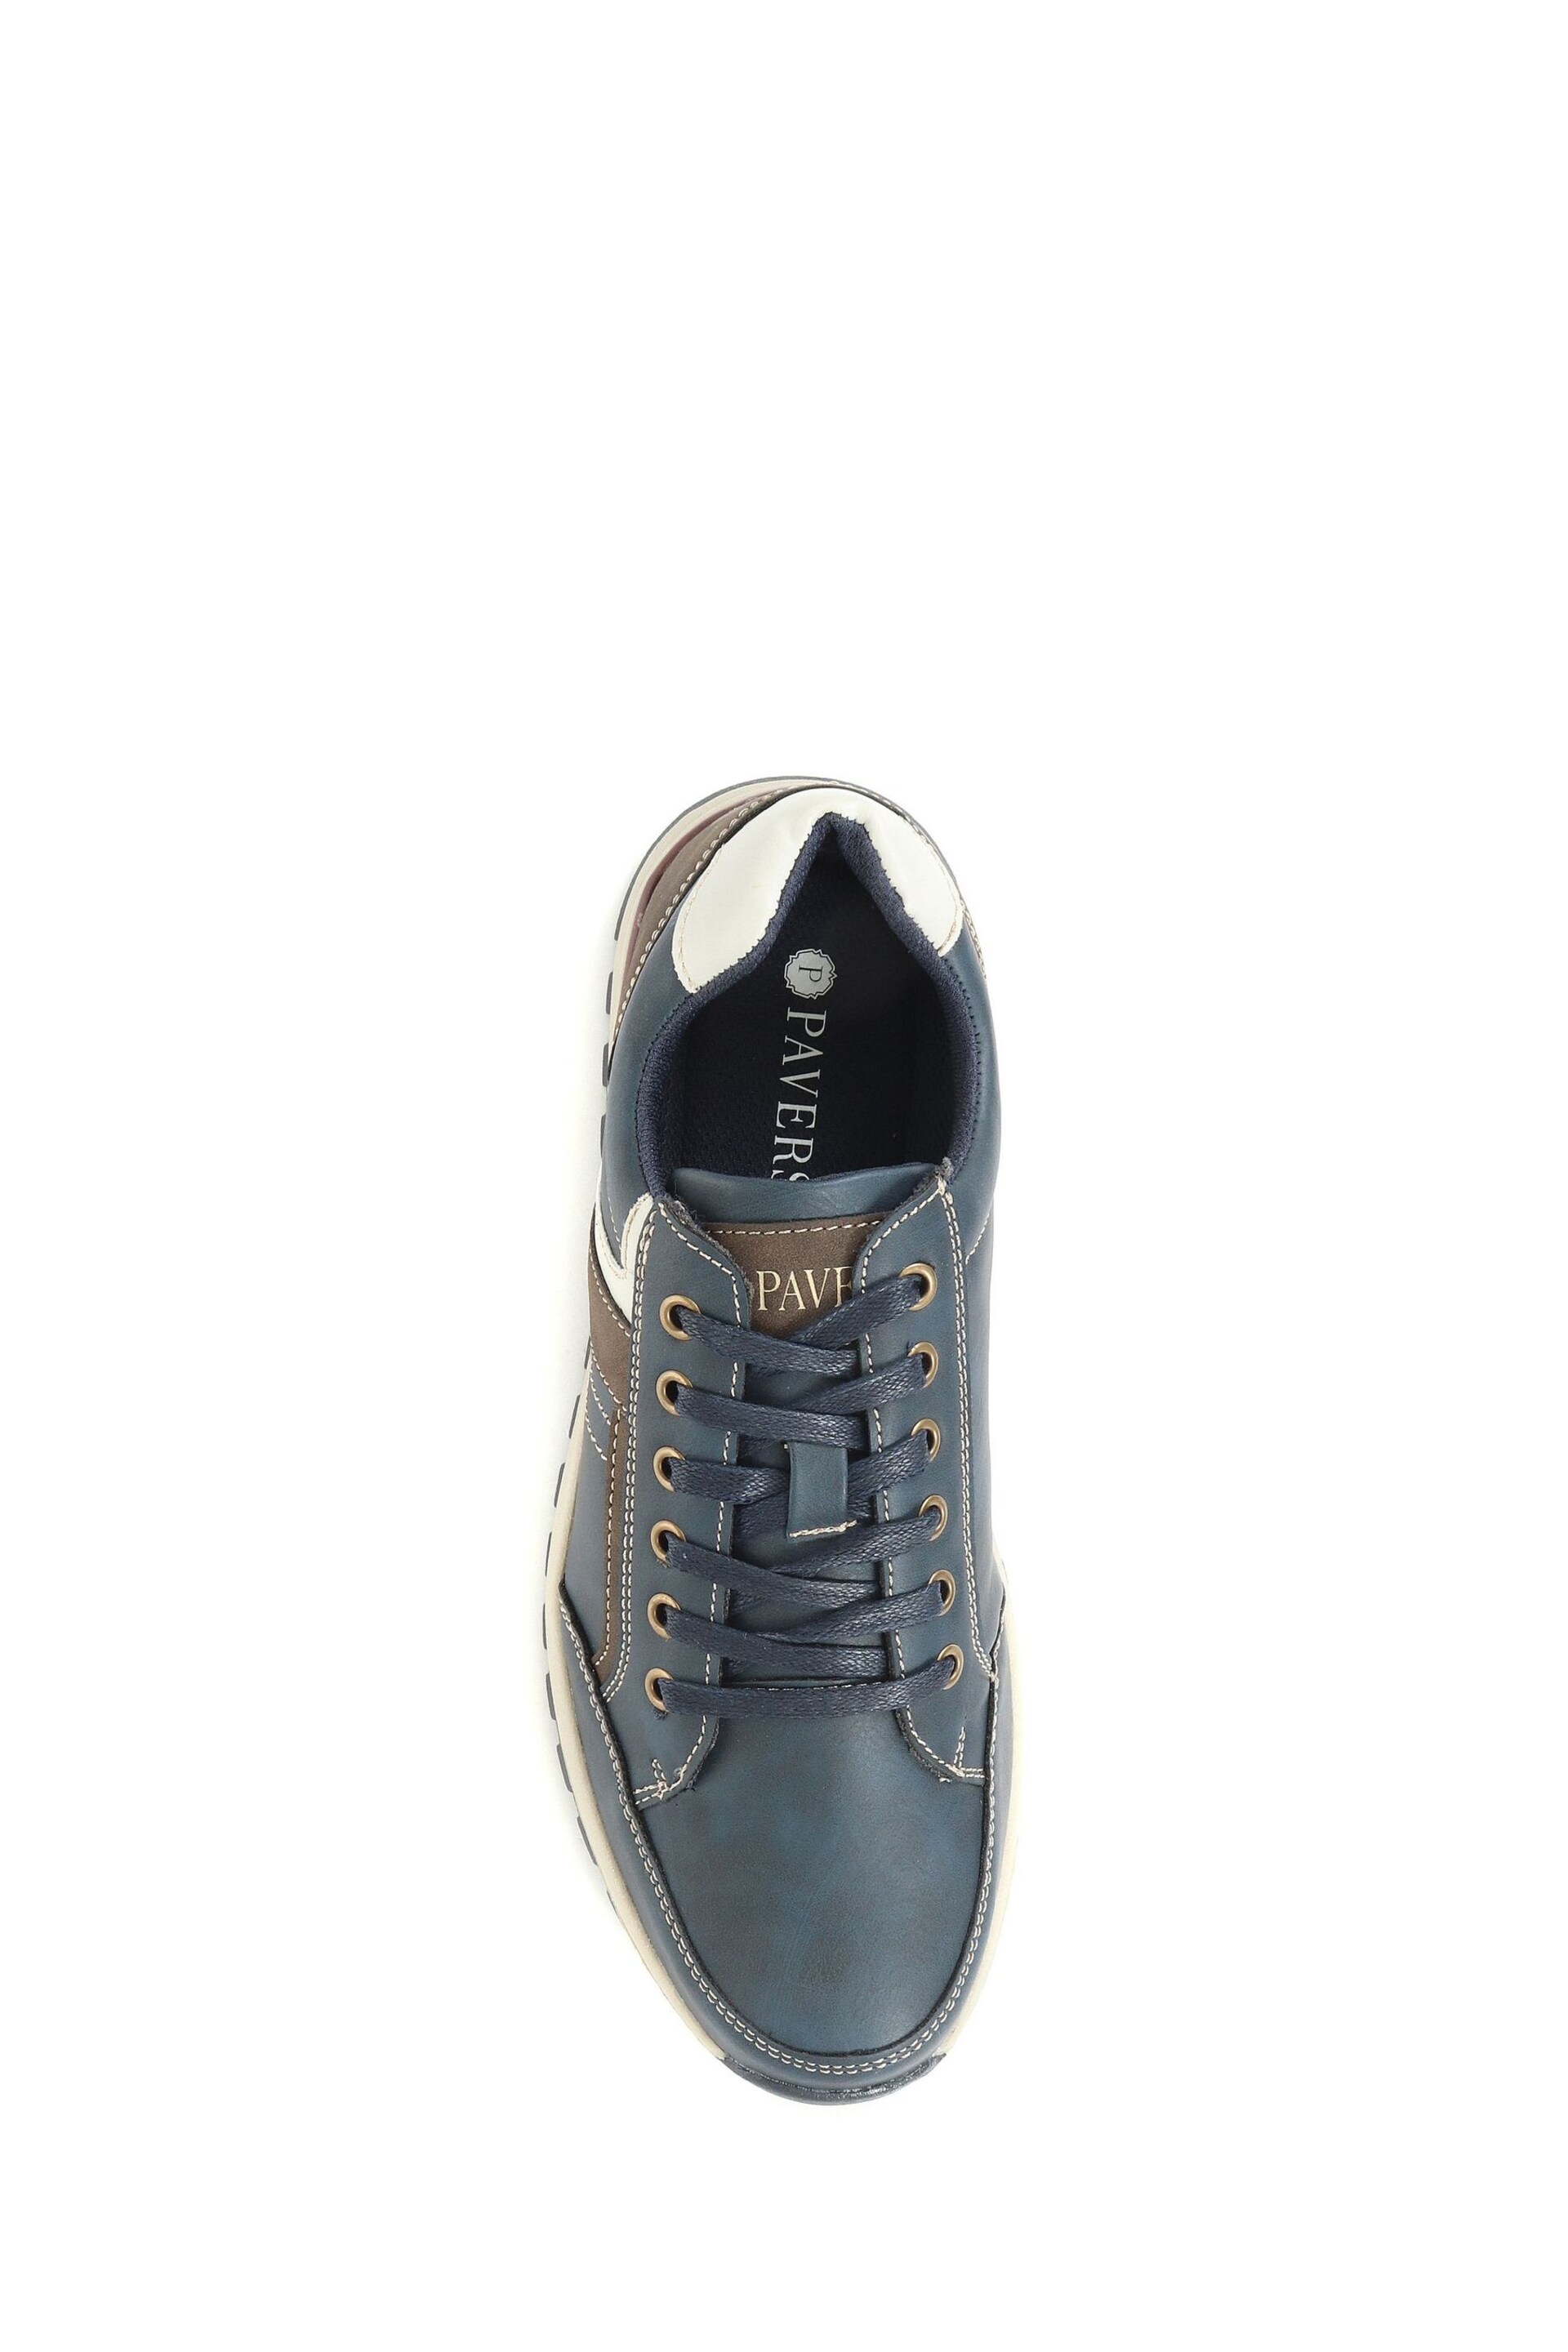 Pavers Lace Up Trainers - Image 5 of 5